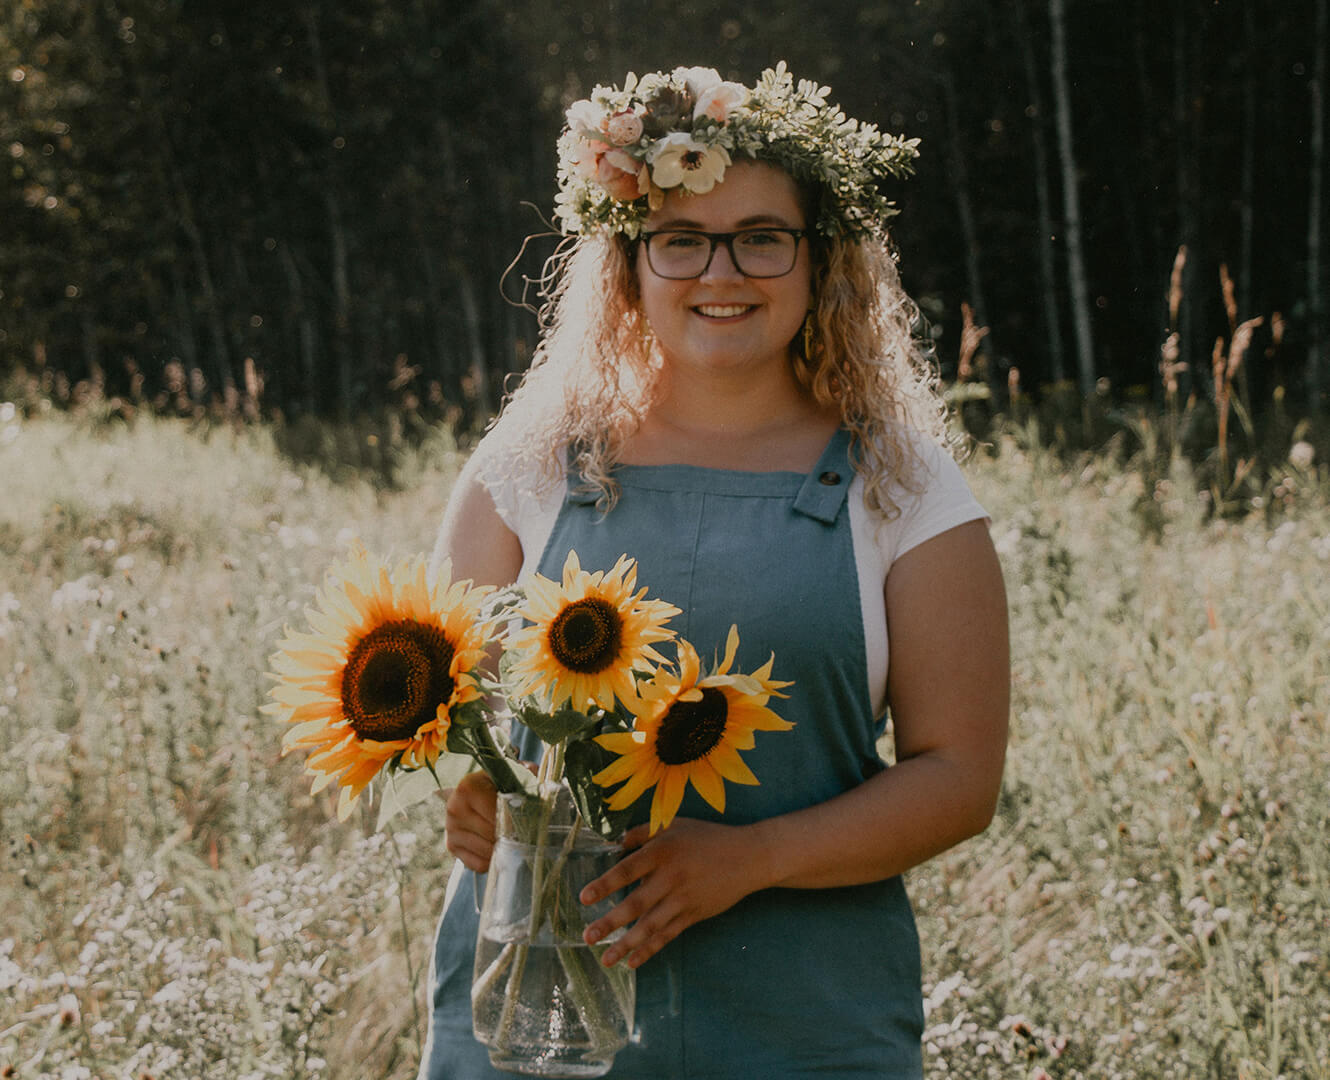 Natasha Martinez stands in wheat field holding bouquet of sunflowers